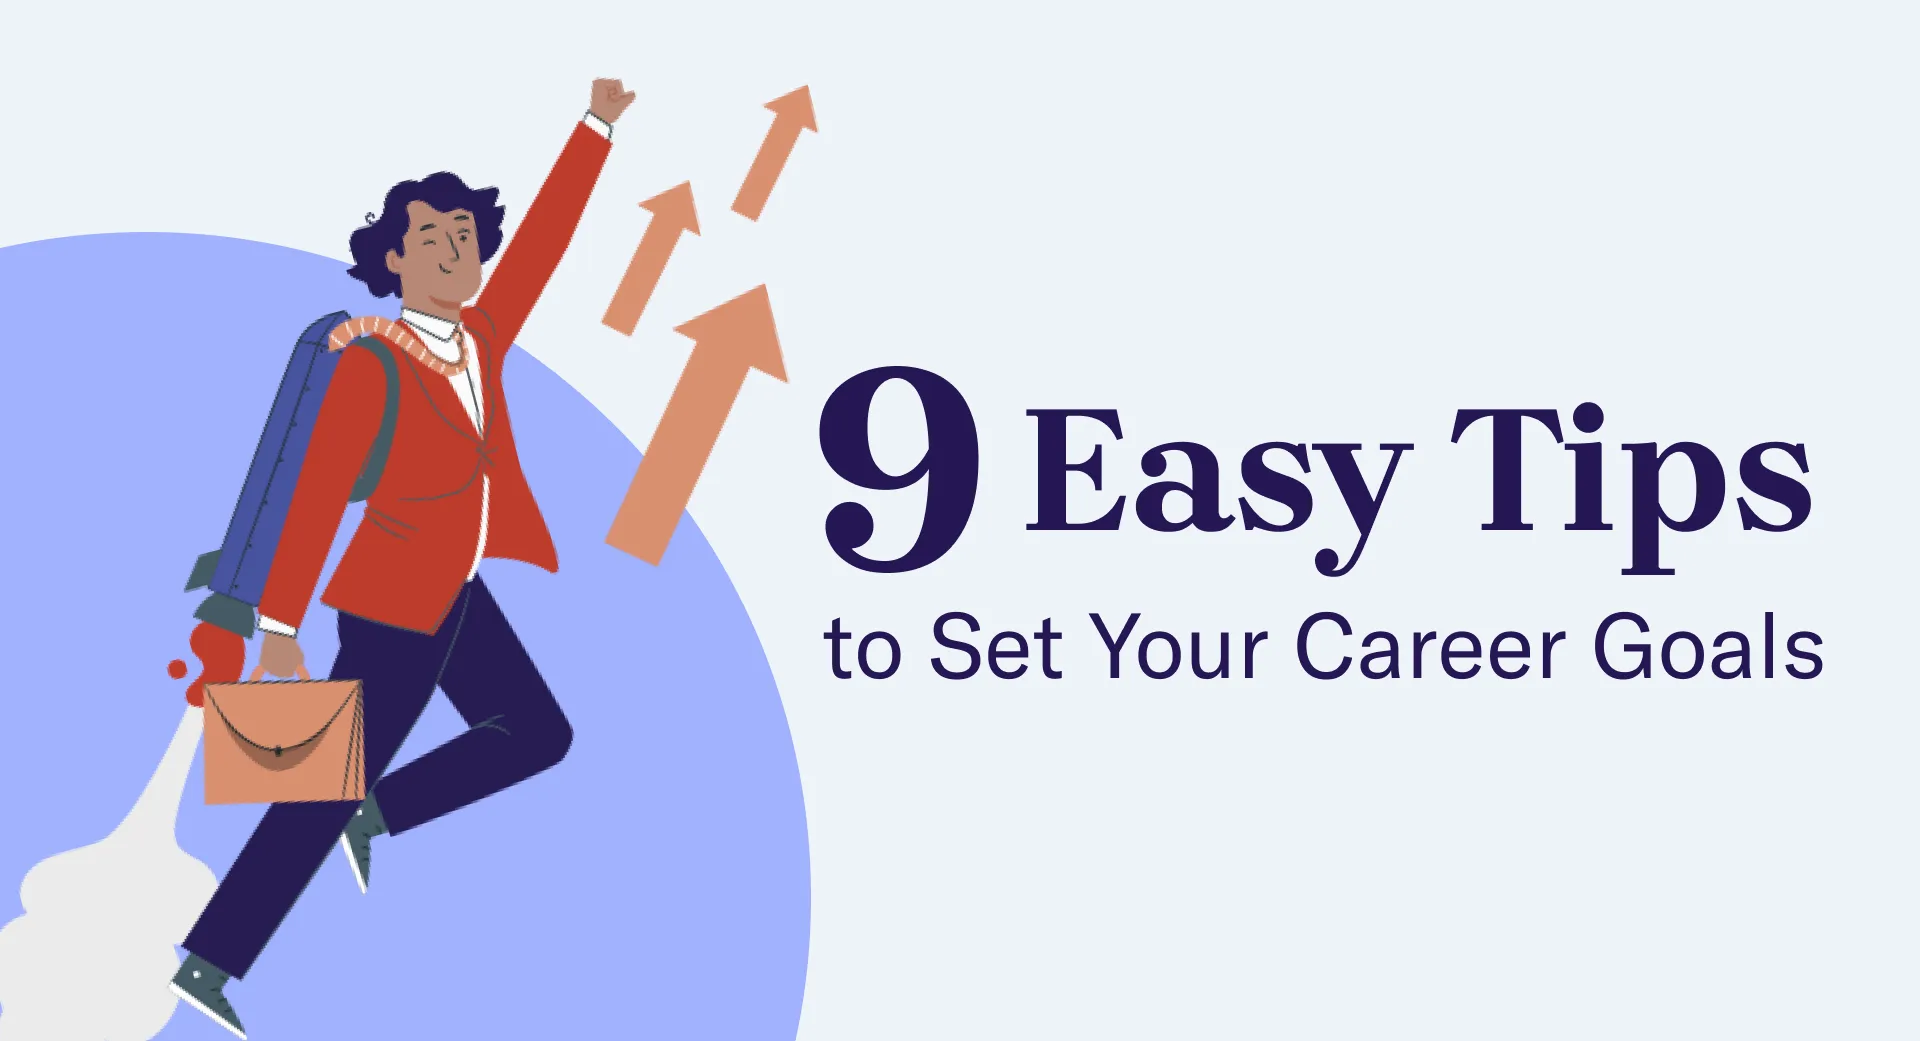 9 Easy Tips to Set Your Career Goals